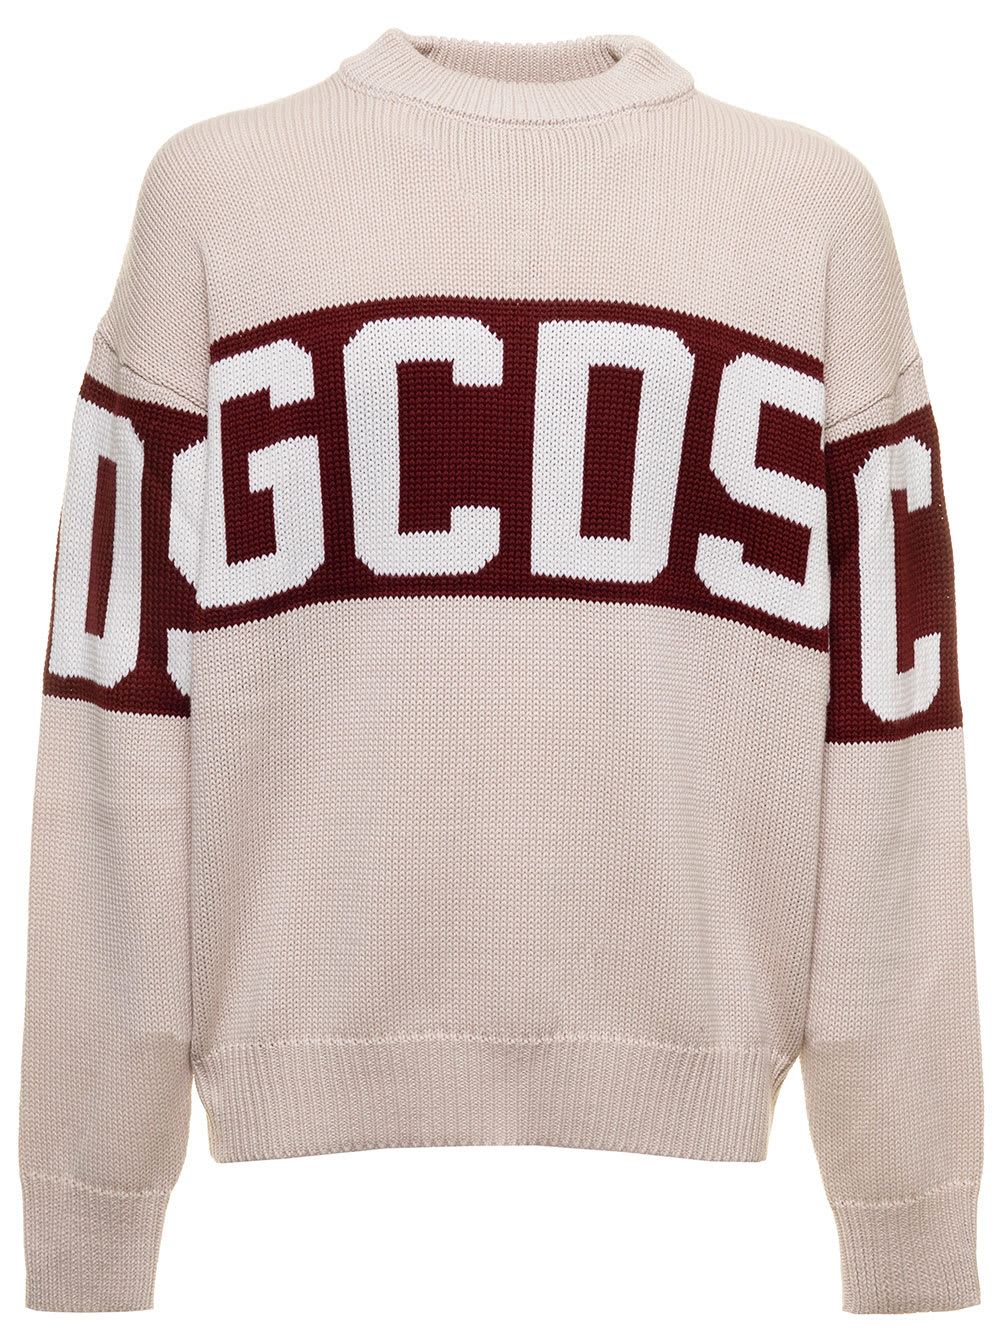 Off White Sweater In Mixed Wool Knit With Contrast Jacquard Logo Band Gcds Man